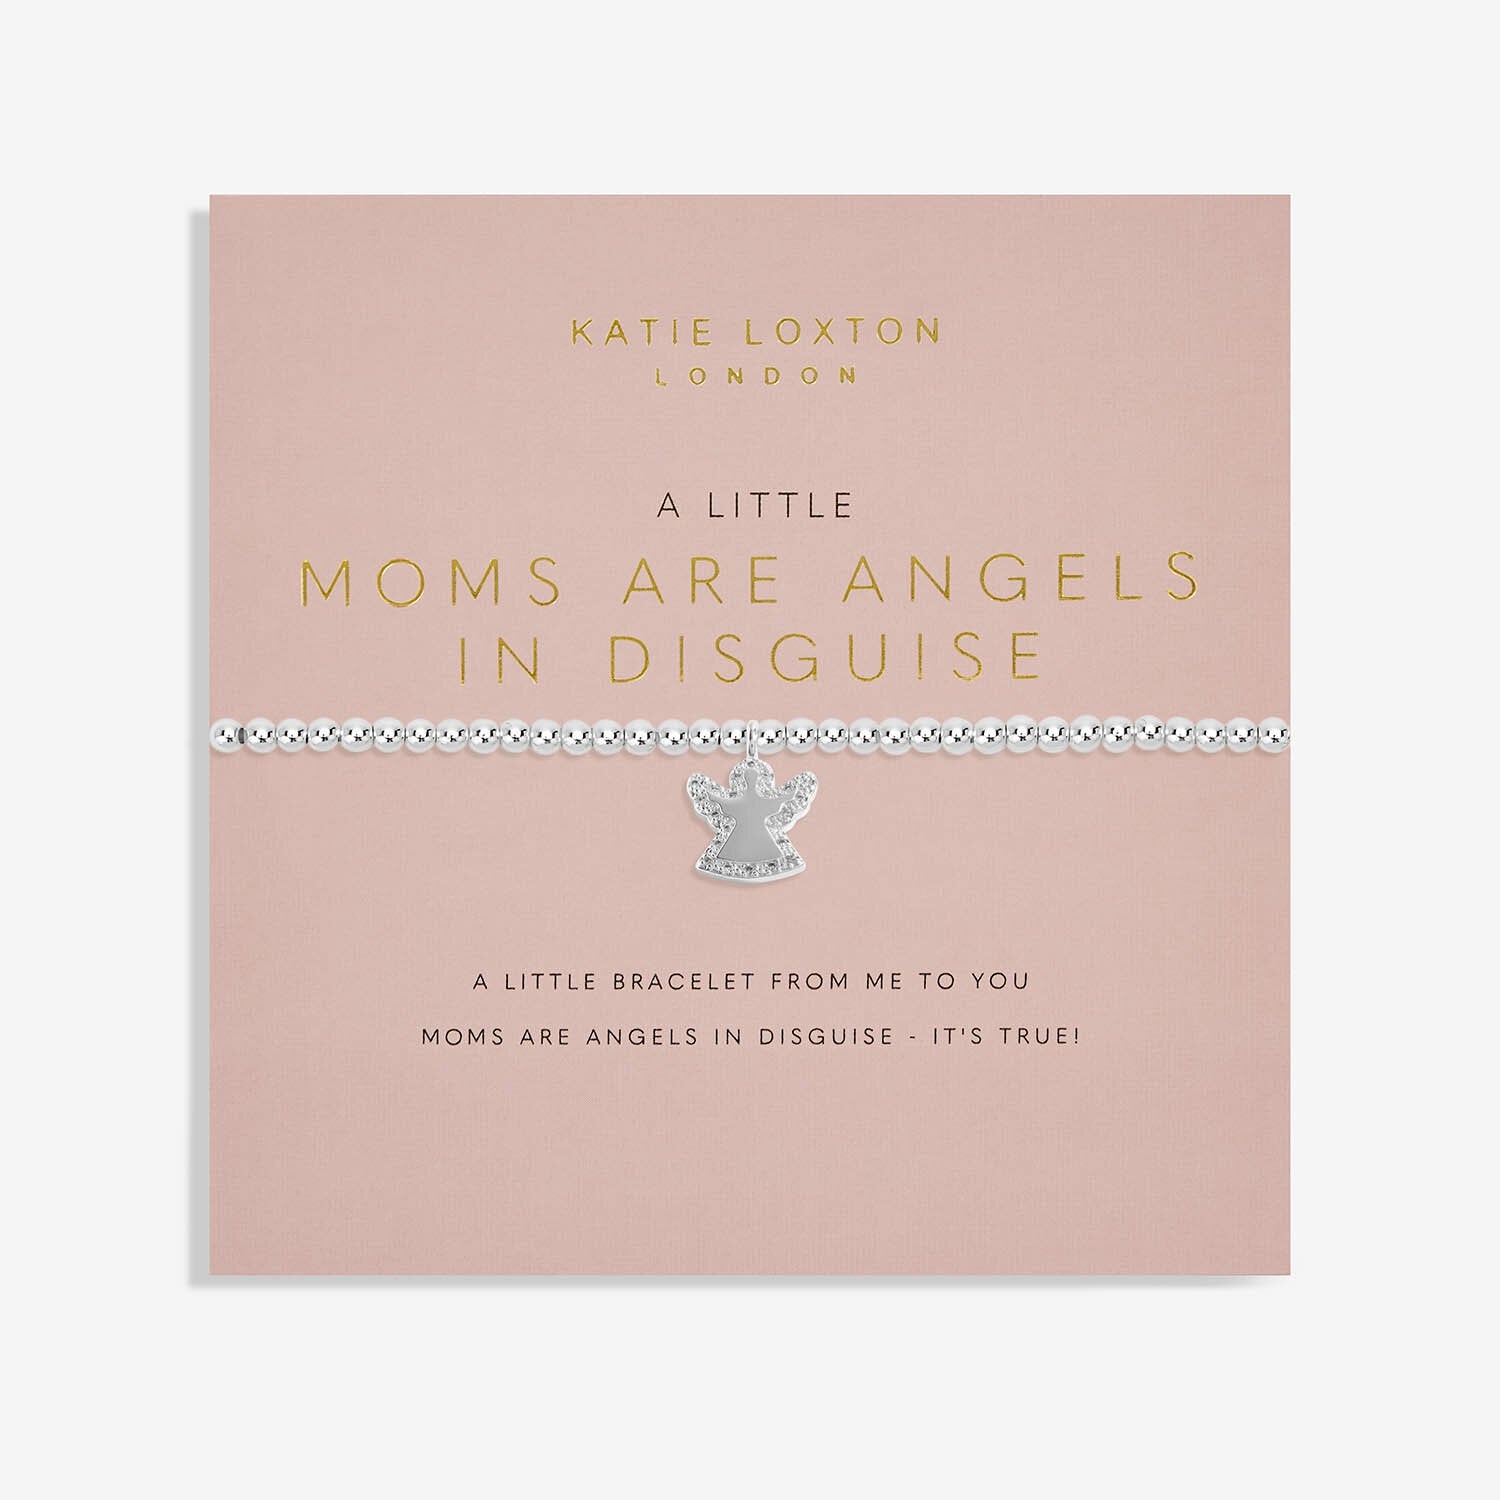 A Little "Mom's Are Angels in Disguise" Bracelet